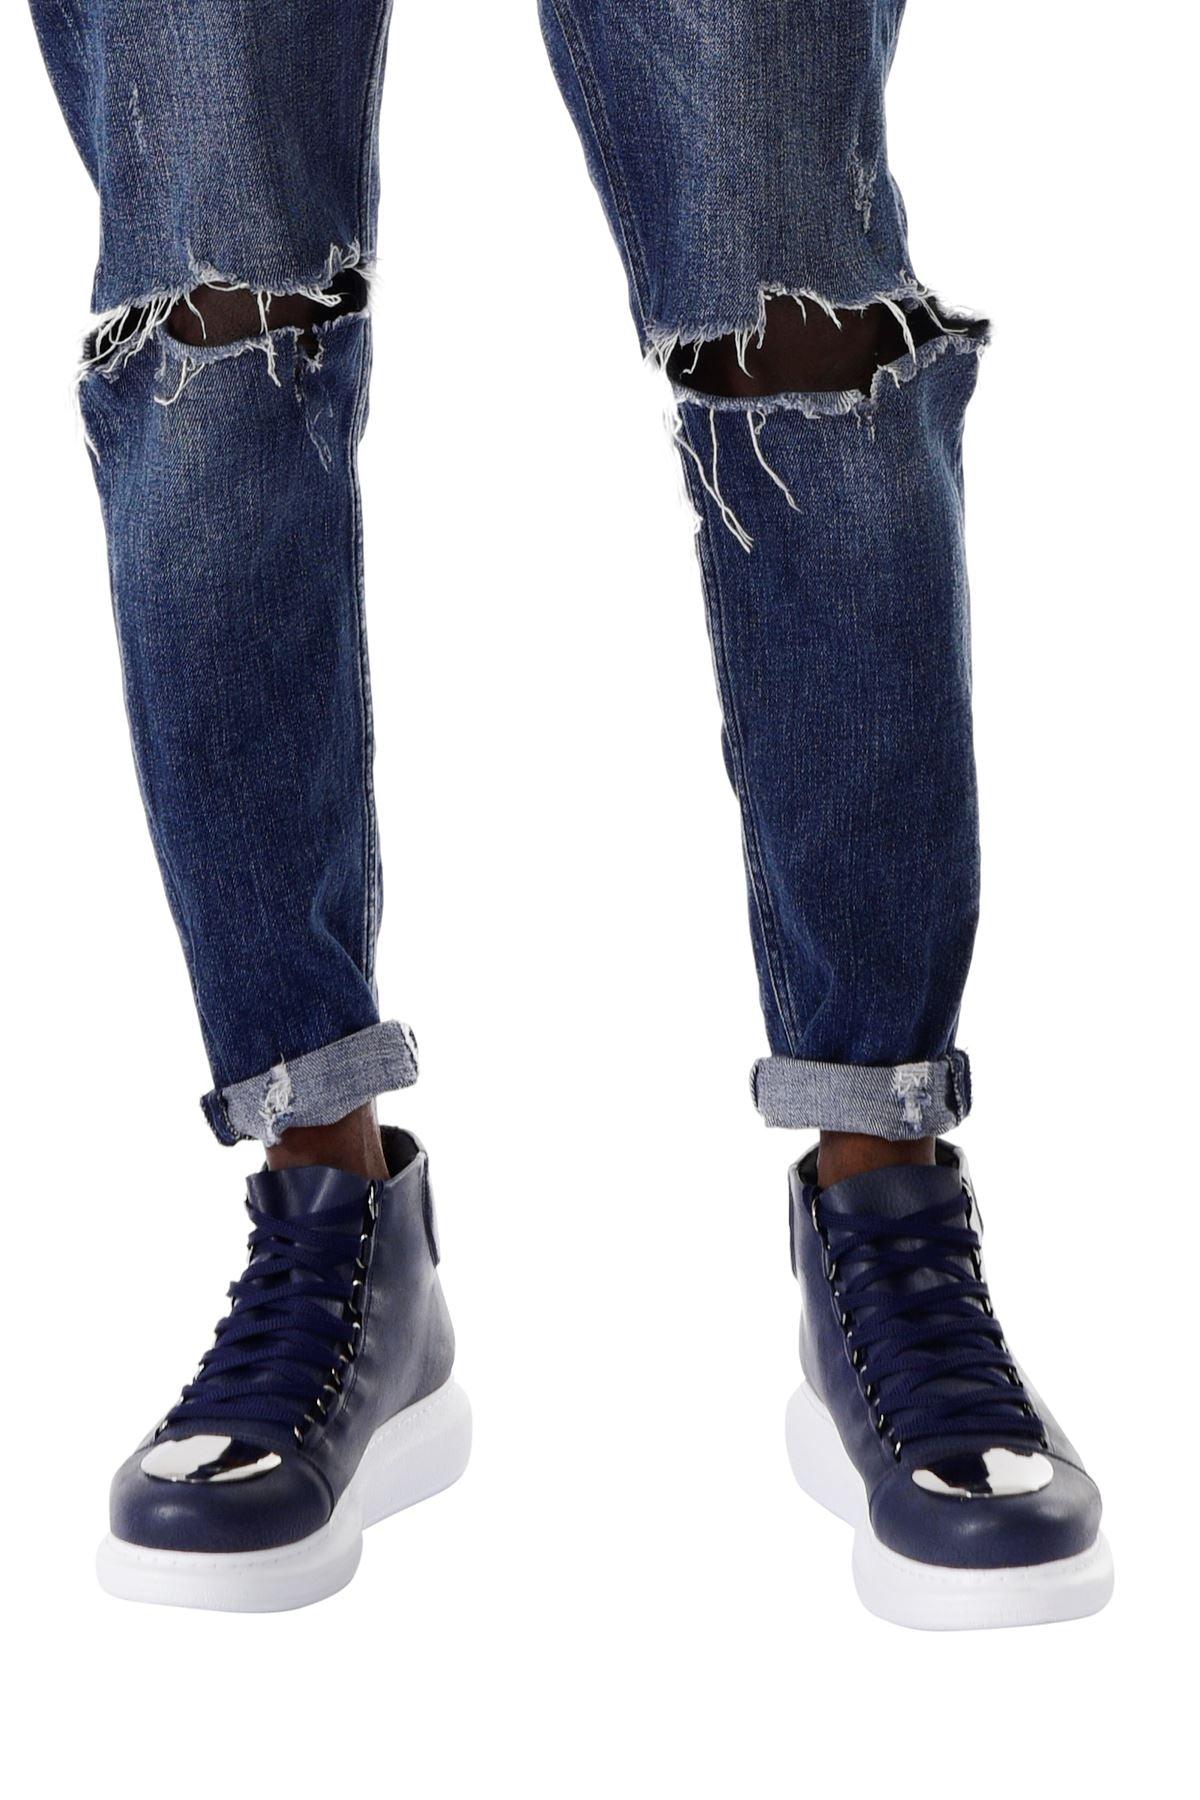 CH267 Men's shoes sneakers Boots BLUE - STREET MODE ™